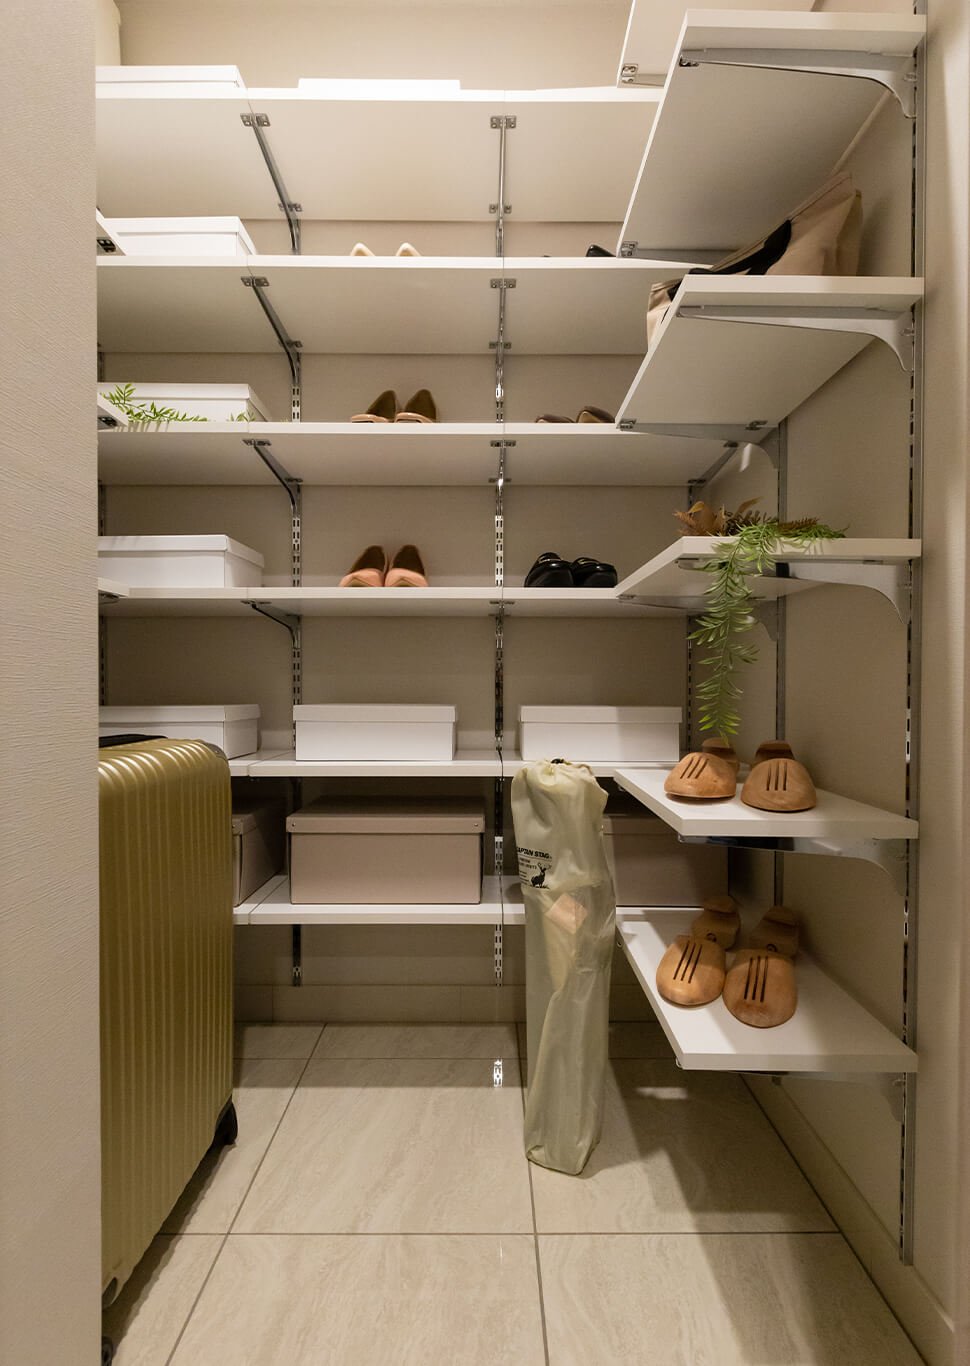 Shoes in closet